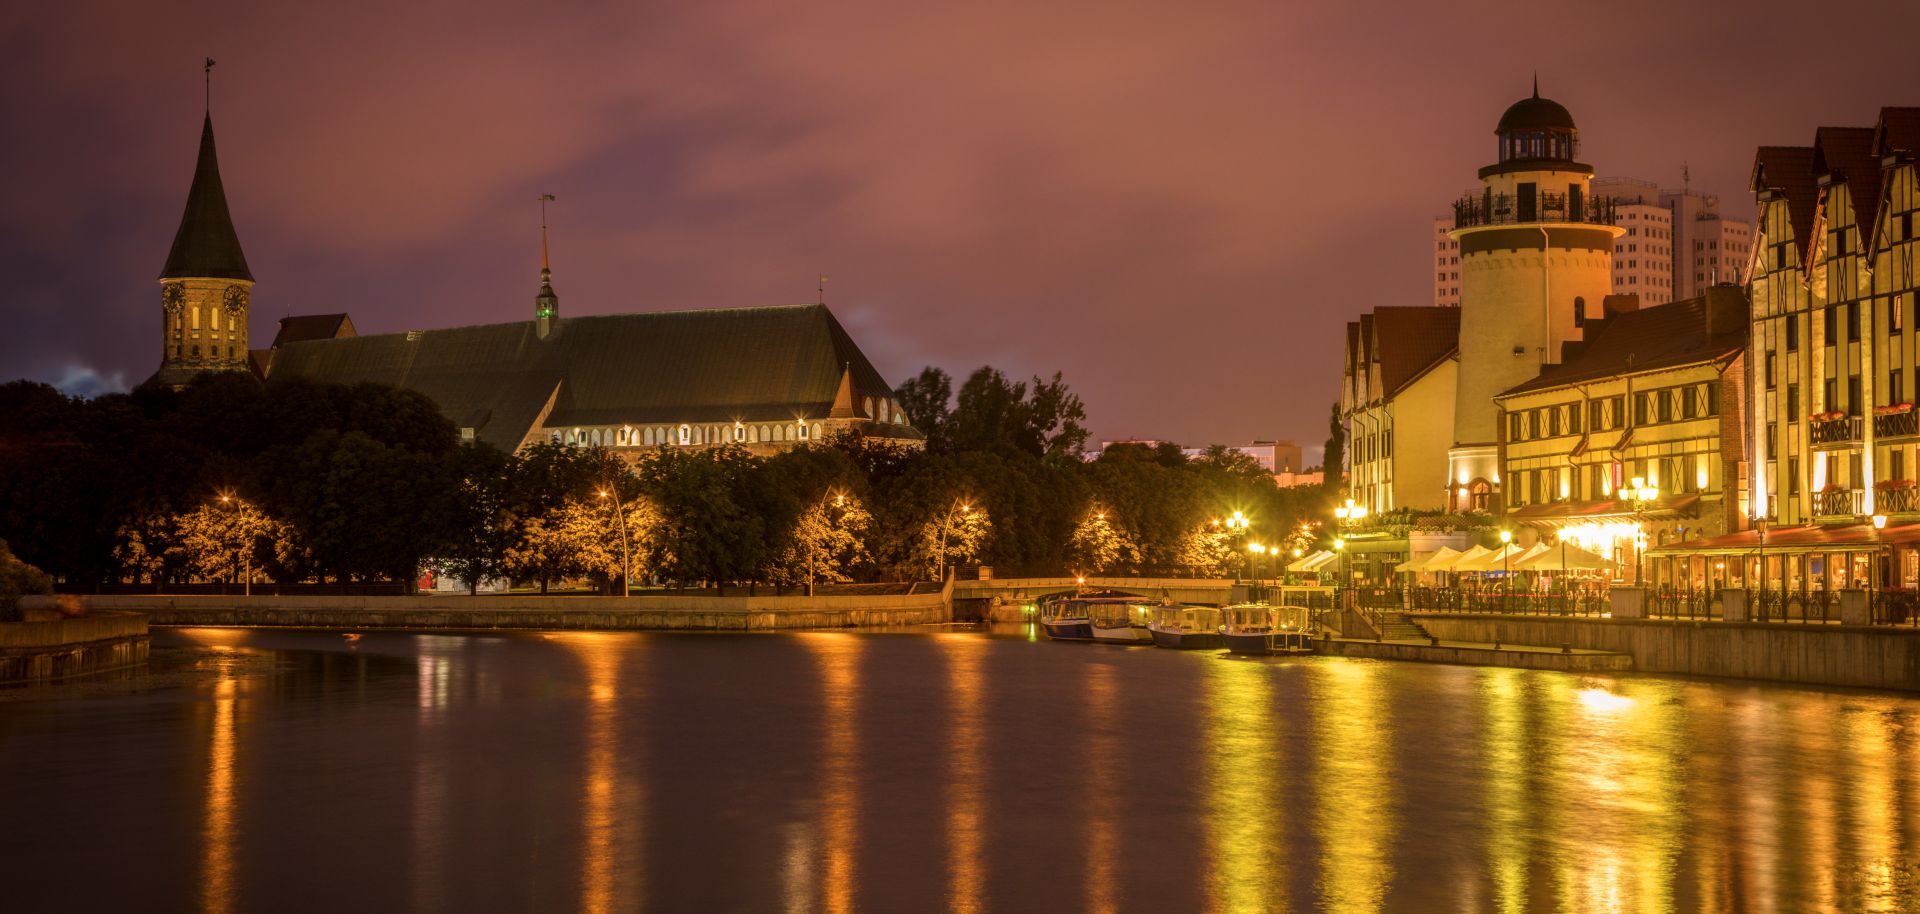 Konigsberg Cathedral and the Pregolya River are seen in this nighttime shot in Kaliningrad.